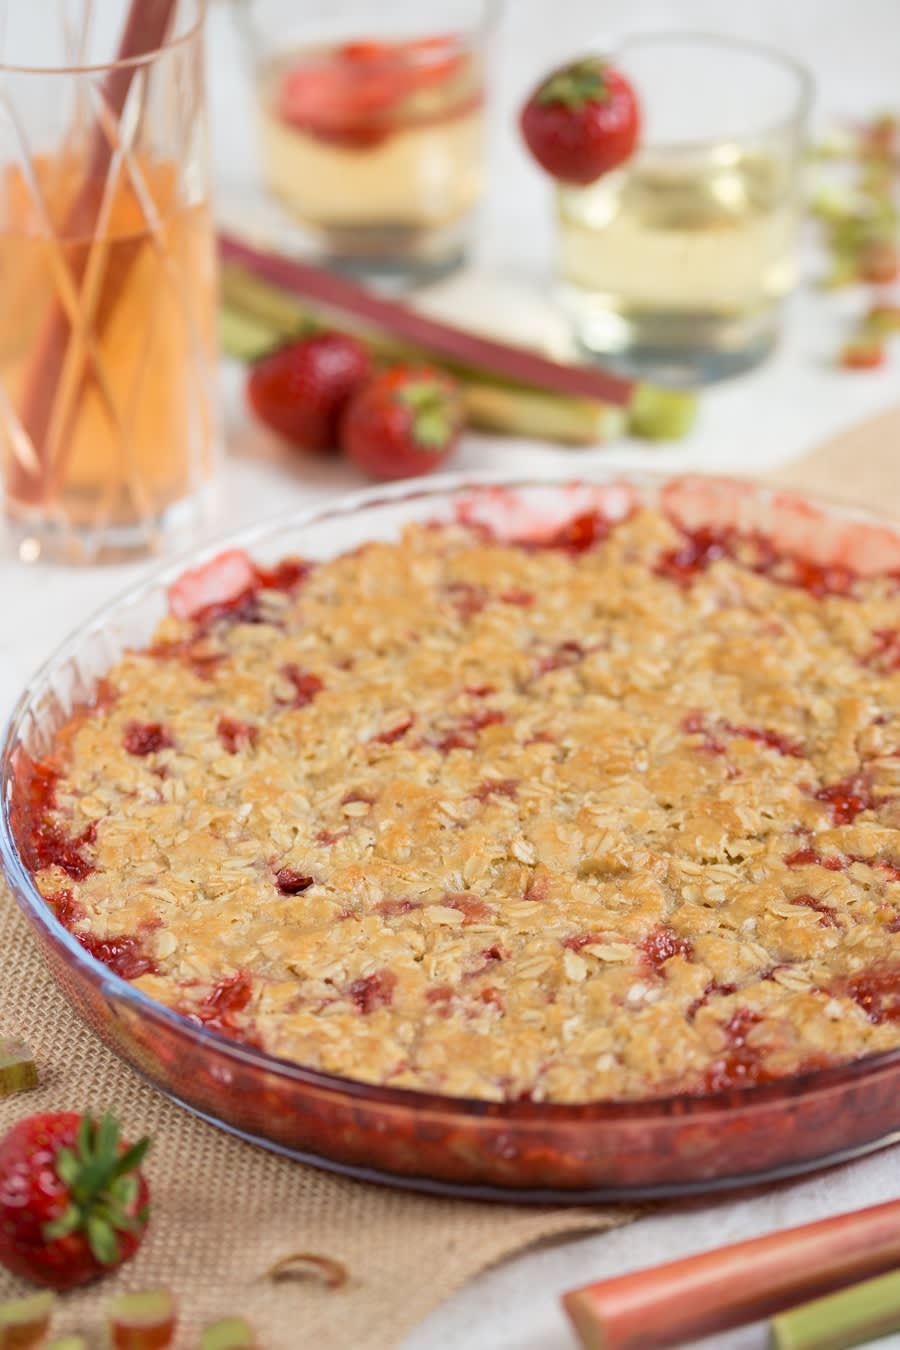 Strawberry rhubarb crisp - Electric Blue Food - Kitchen stories from abroad